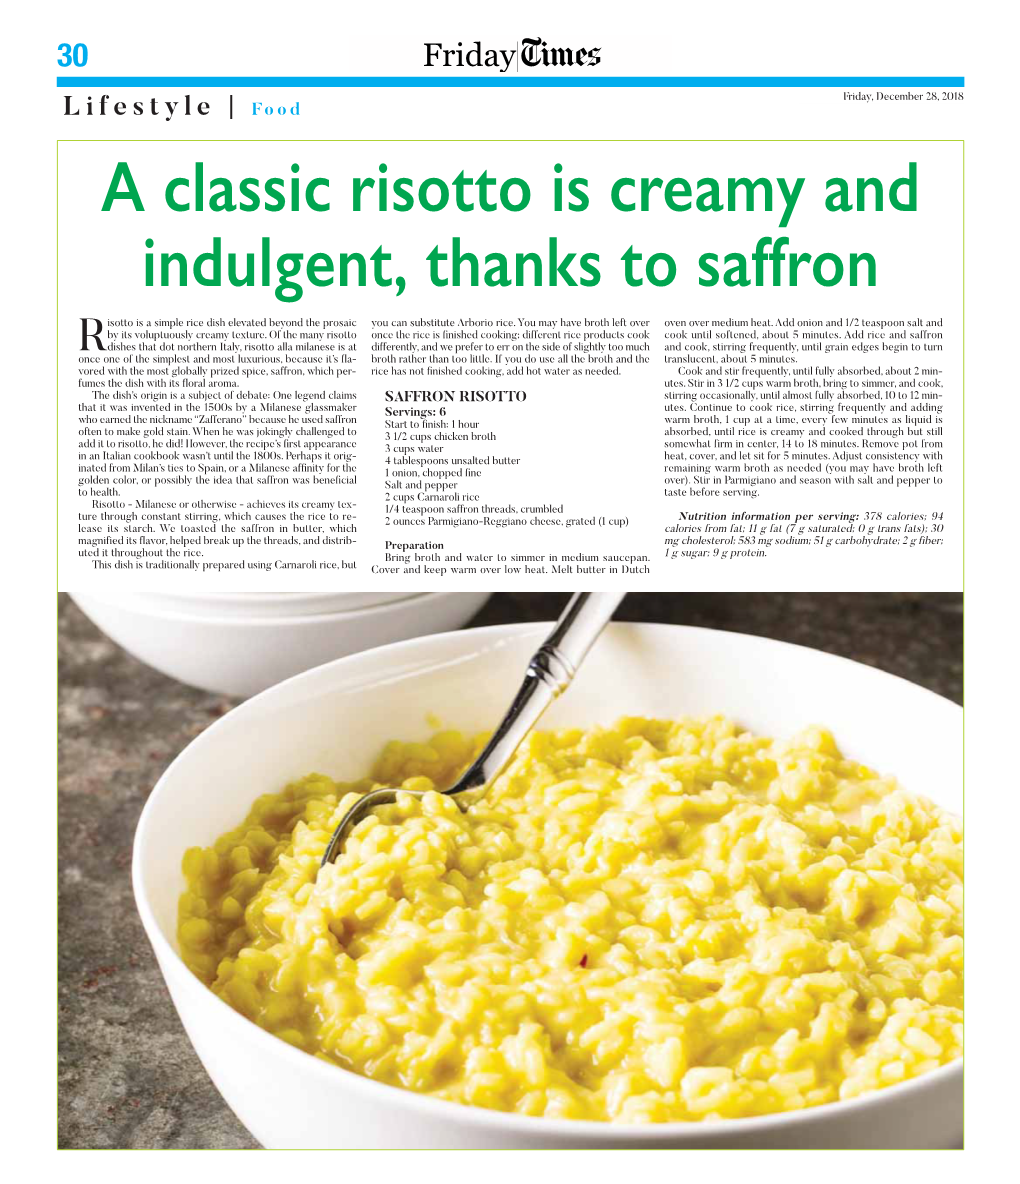 A Classic Risotto Is Creamy and Indulgent, Thanks to Saffron